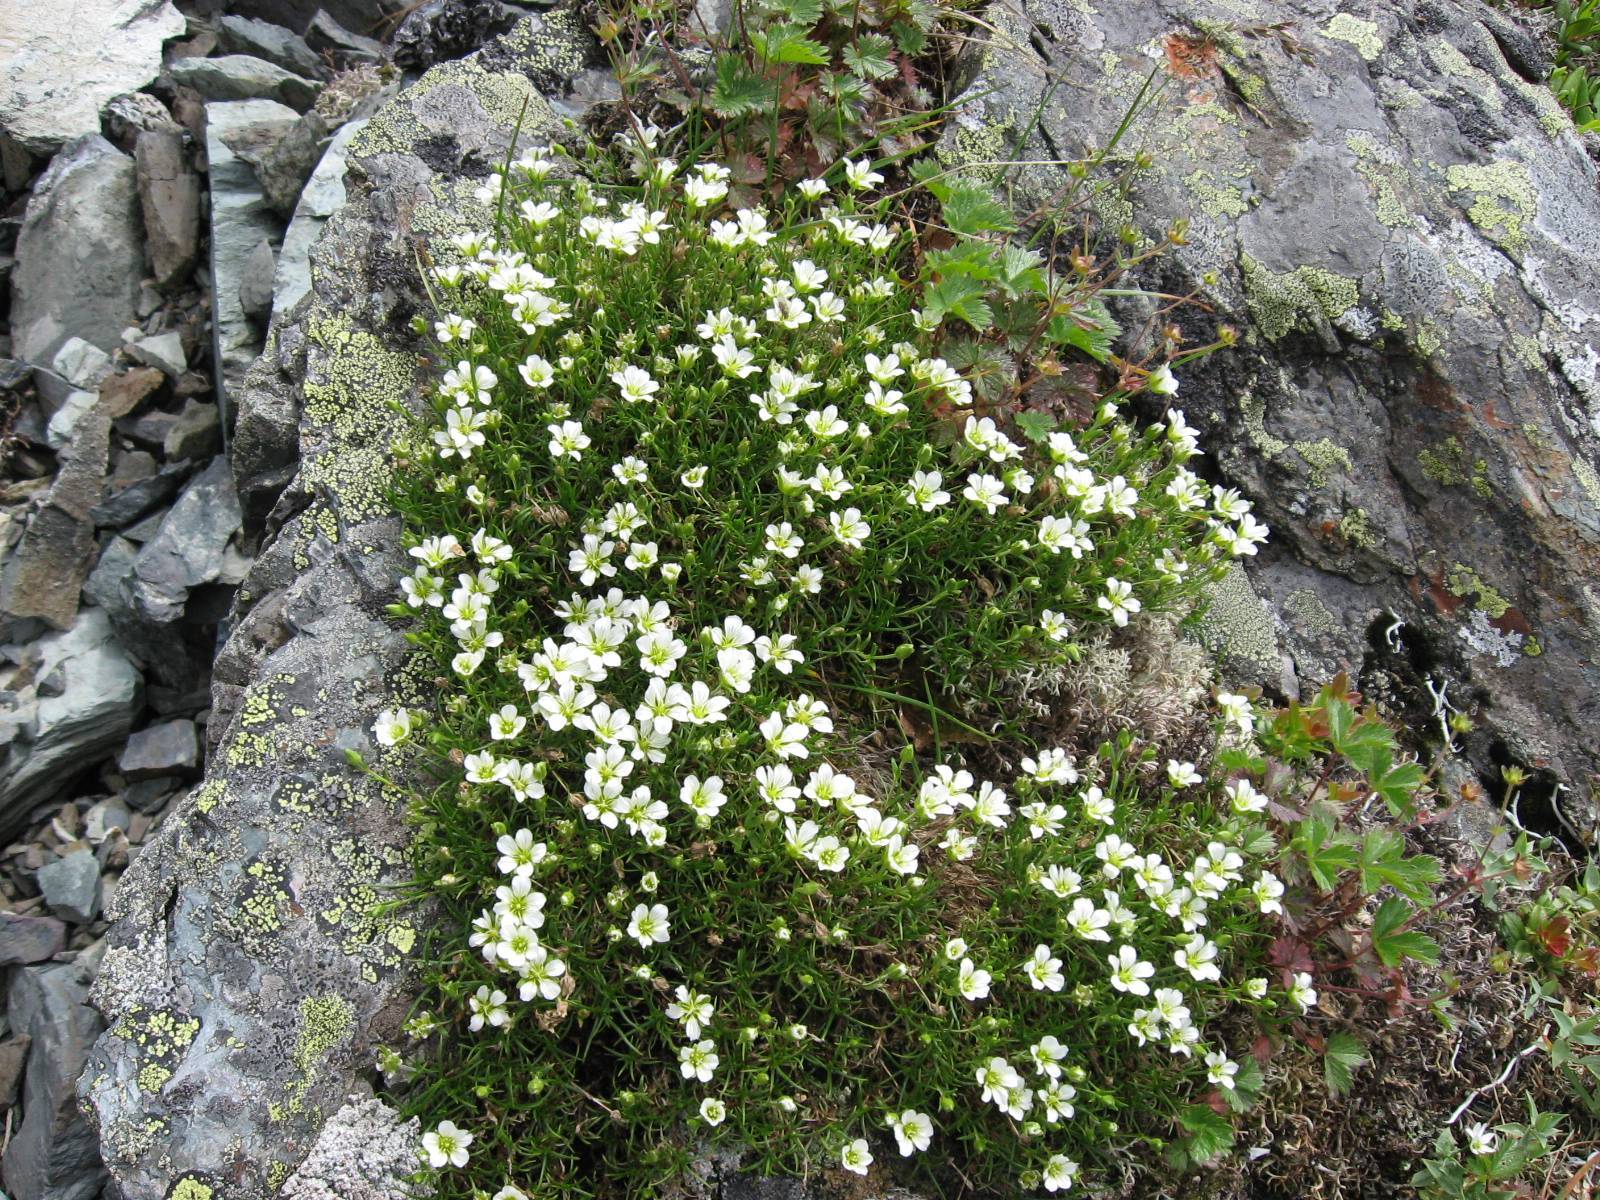 white flowers with lime center, white buds, green leaves and stems